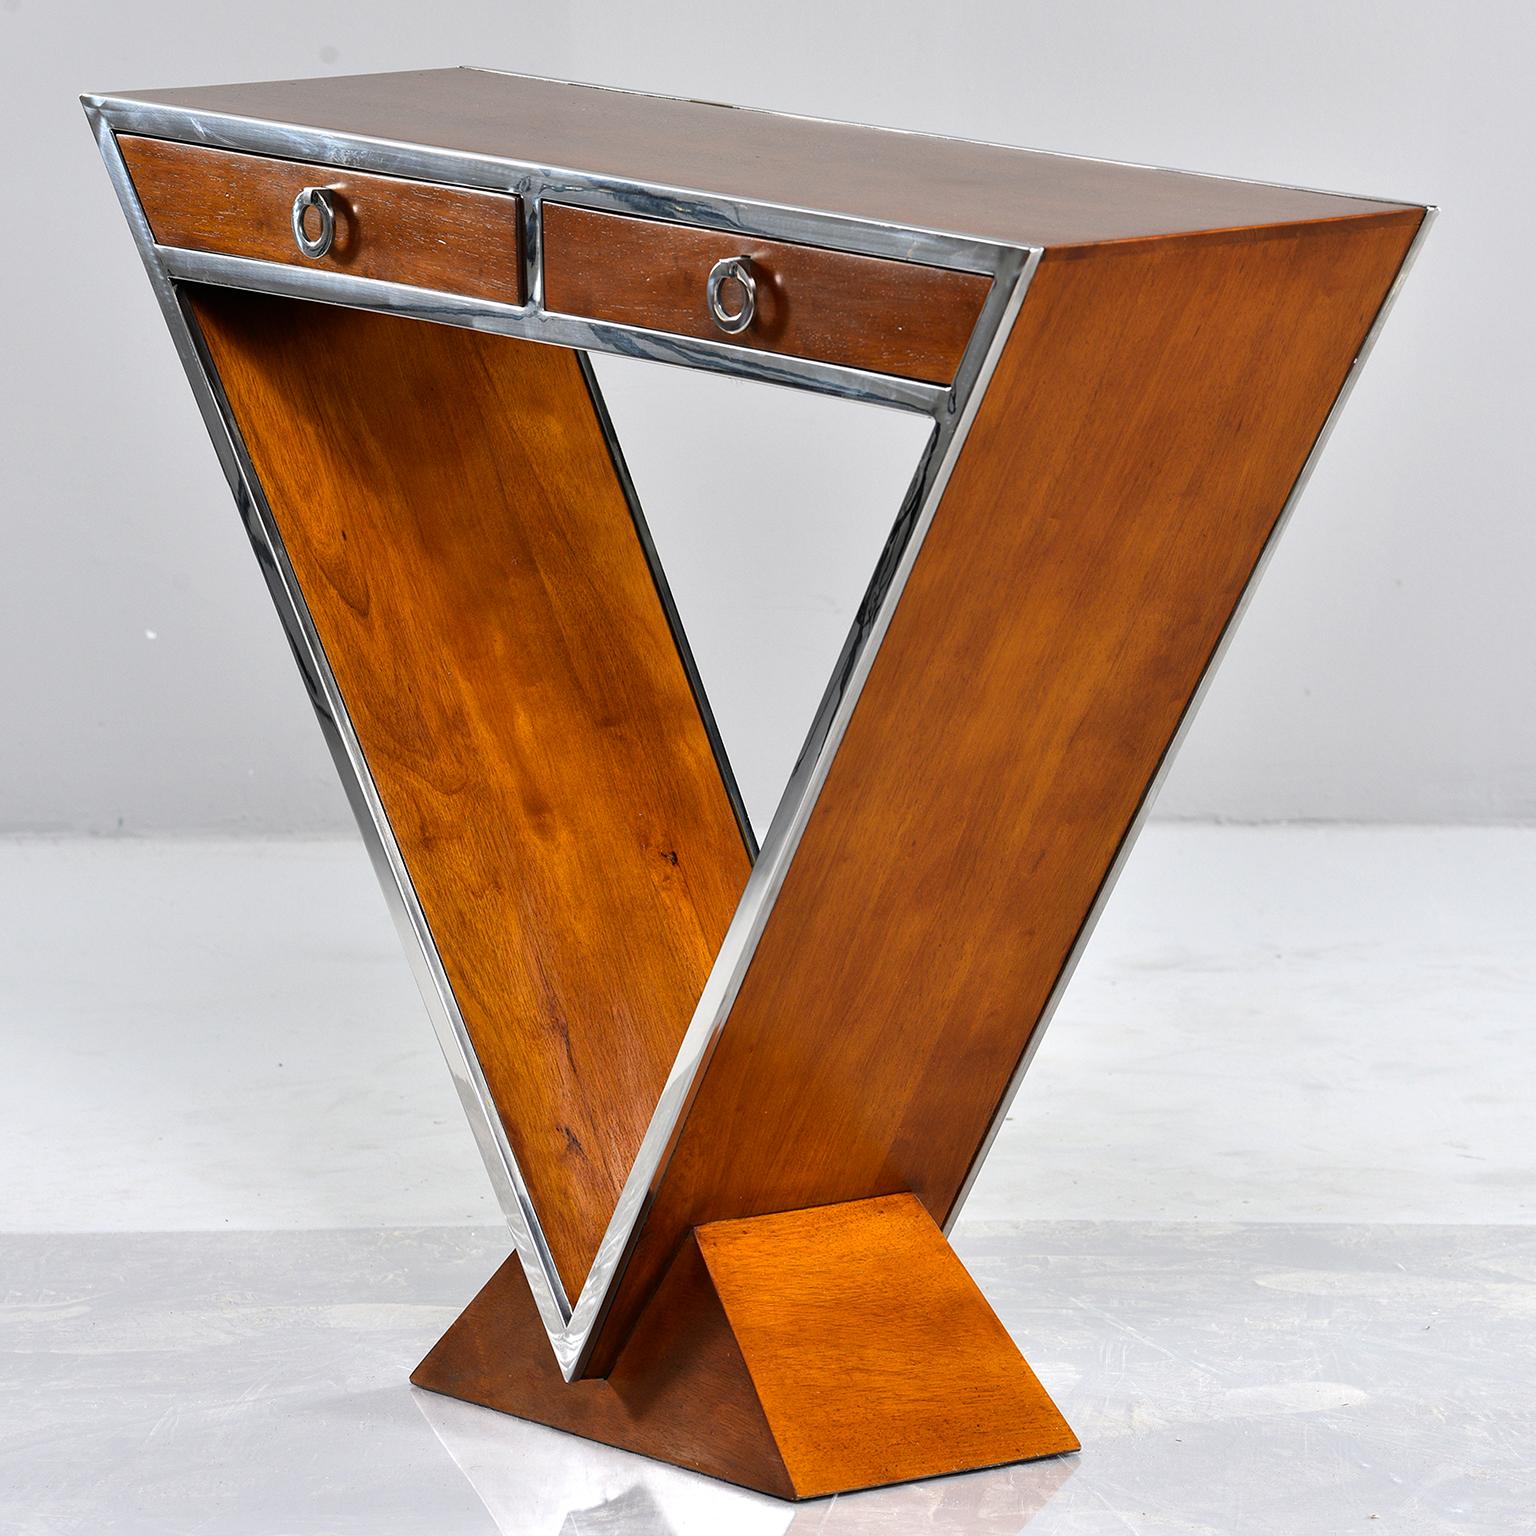 Midcentury console made of teak with chrome trim, circa 1980s. Two functional drawers, unique open triangular supports with teak pedestal base. Unknown maker. 